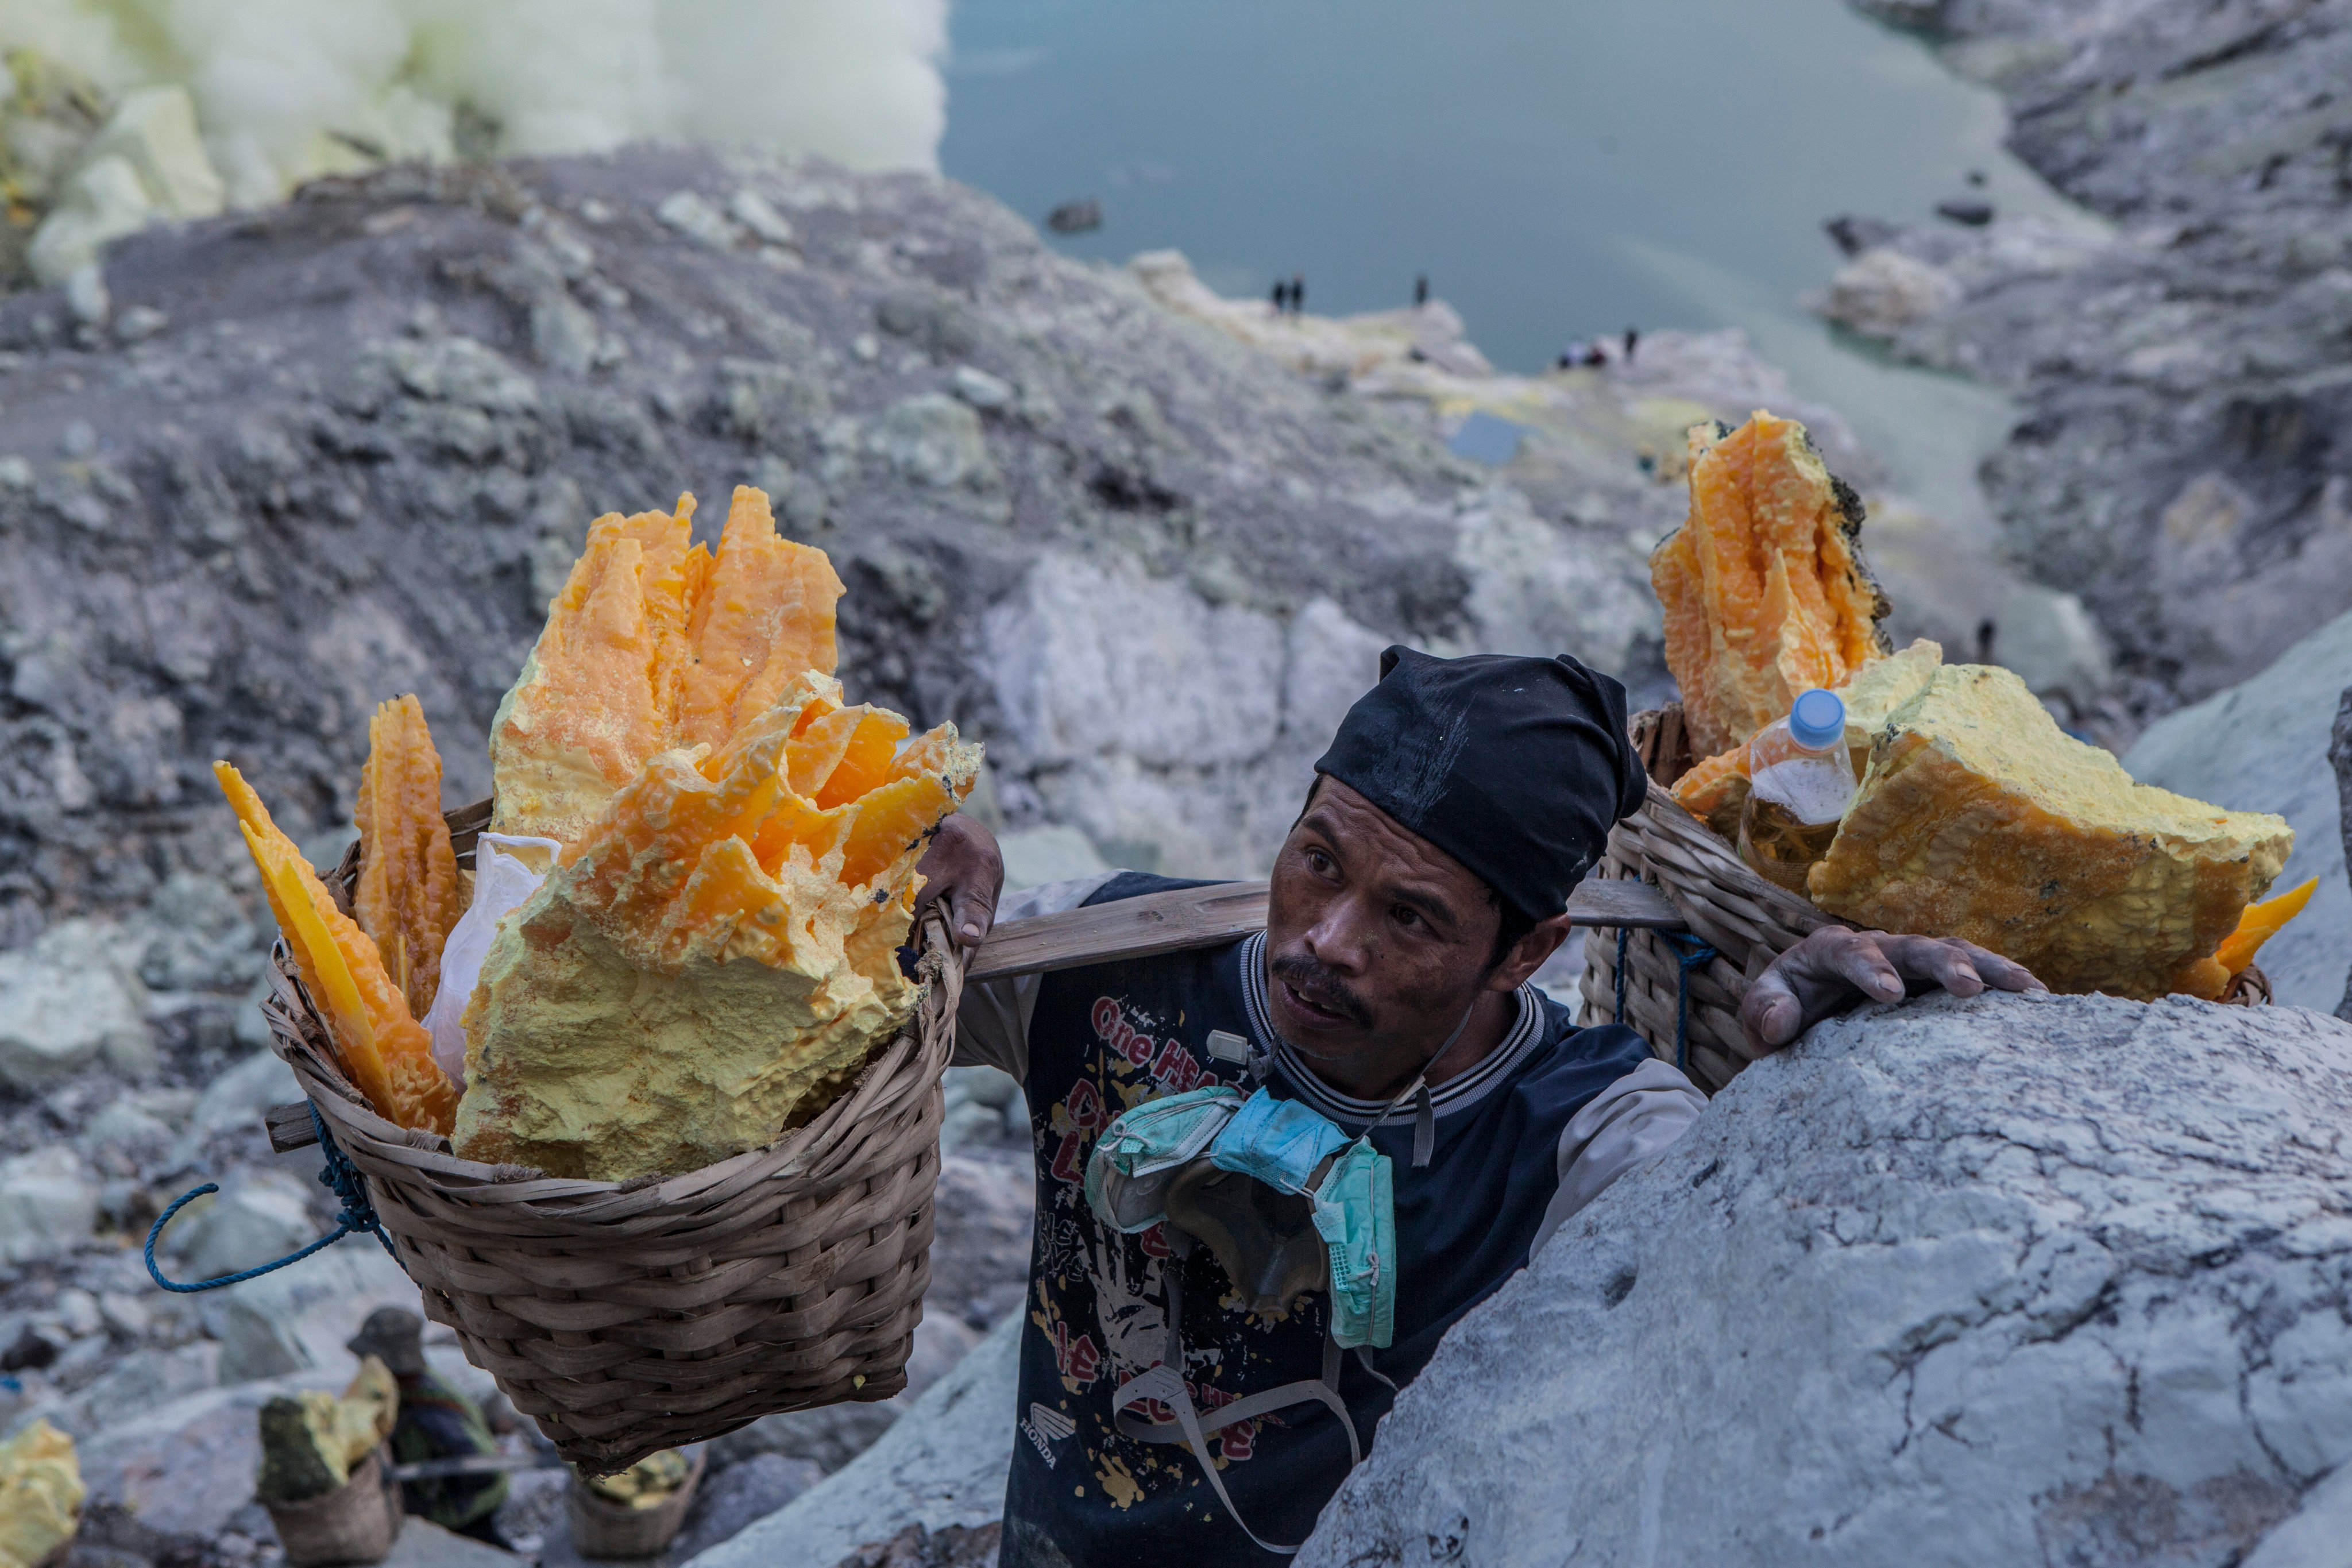 Miner carrying baskets of solid sulphur from the quarry in Indonesia. Photo: Agoes Rudianto/File